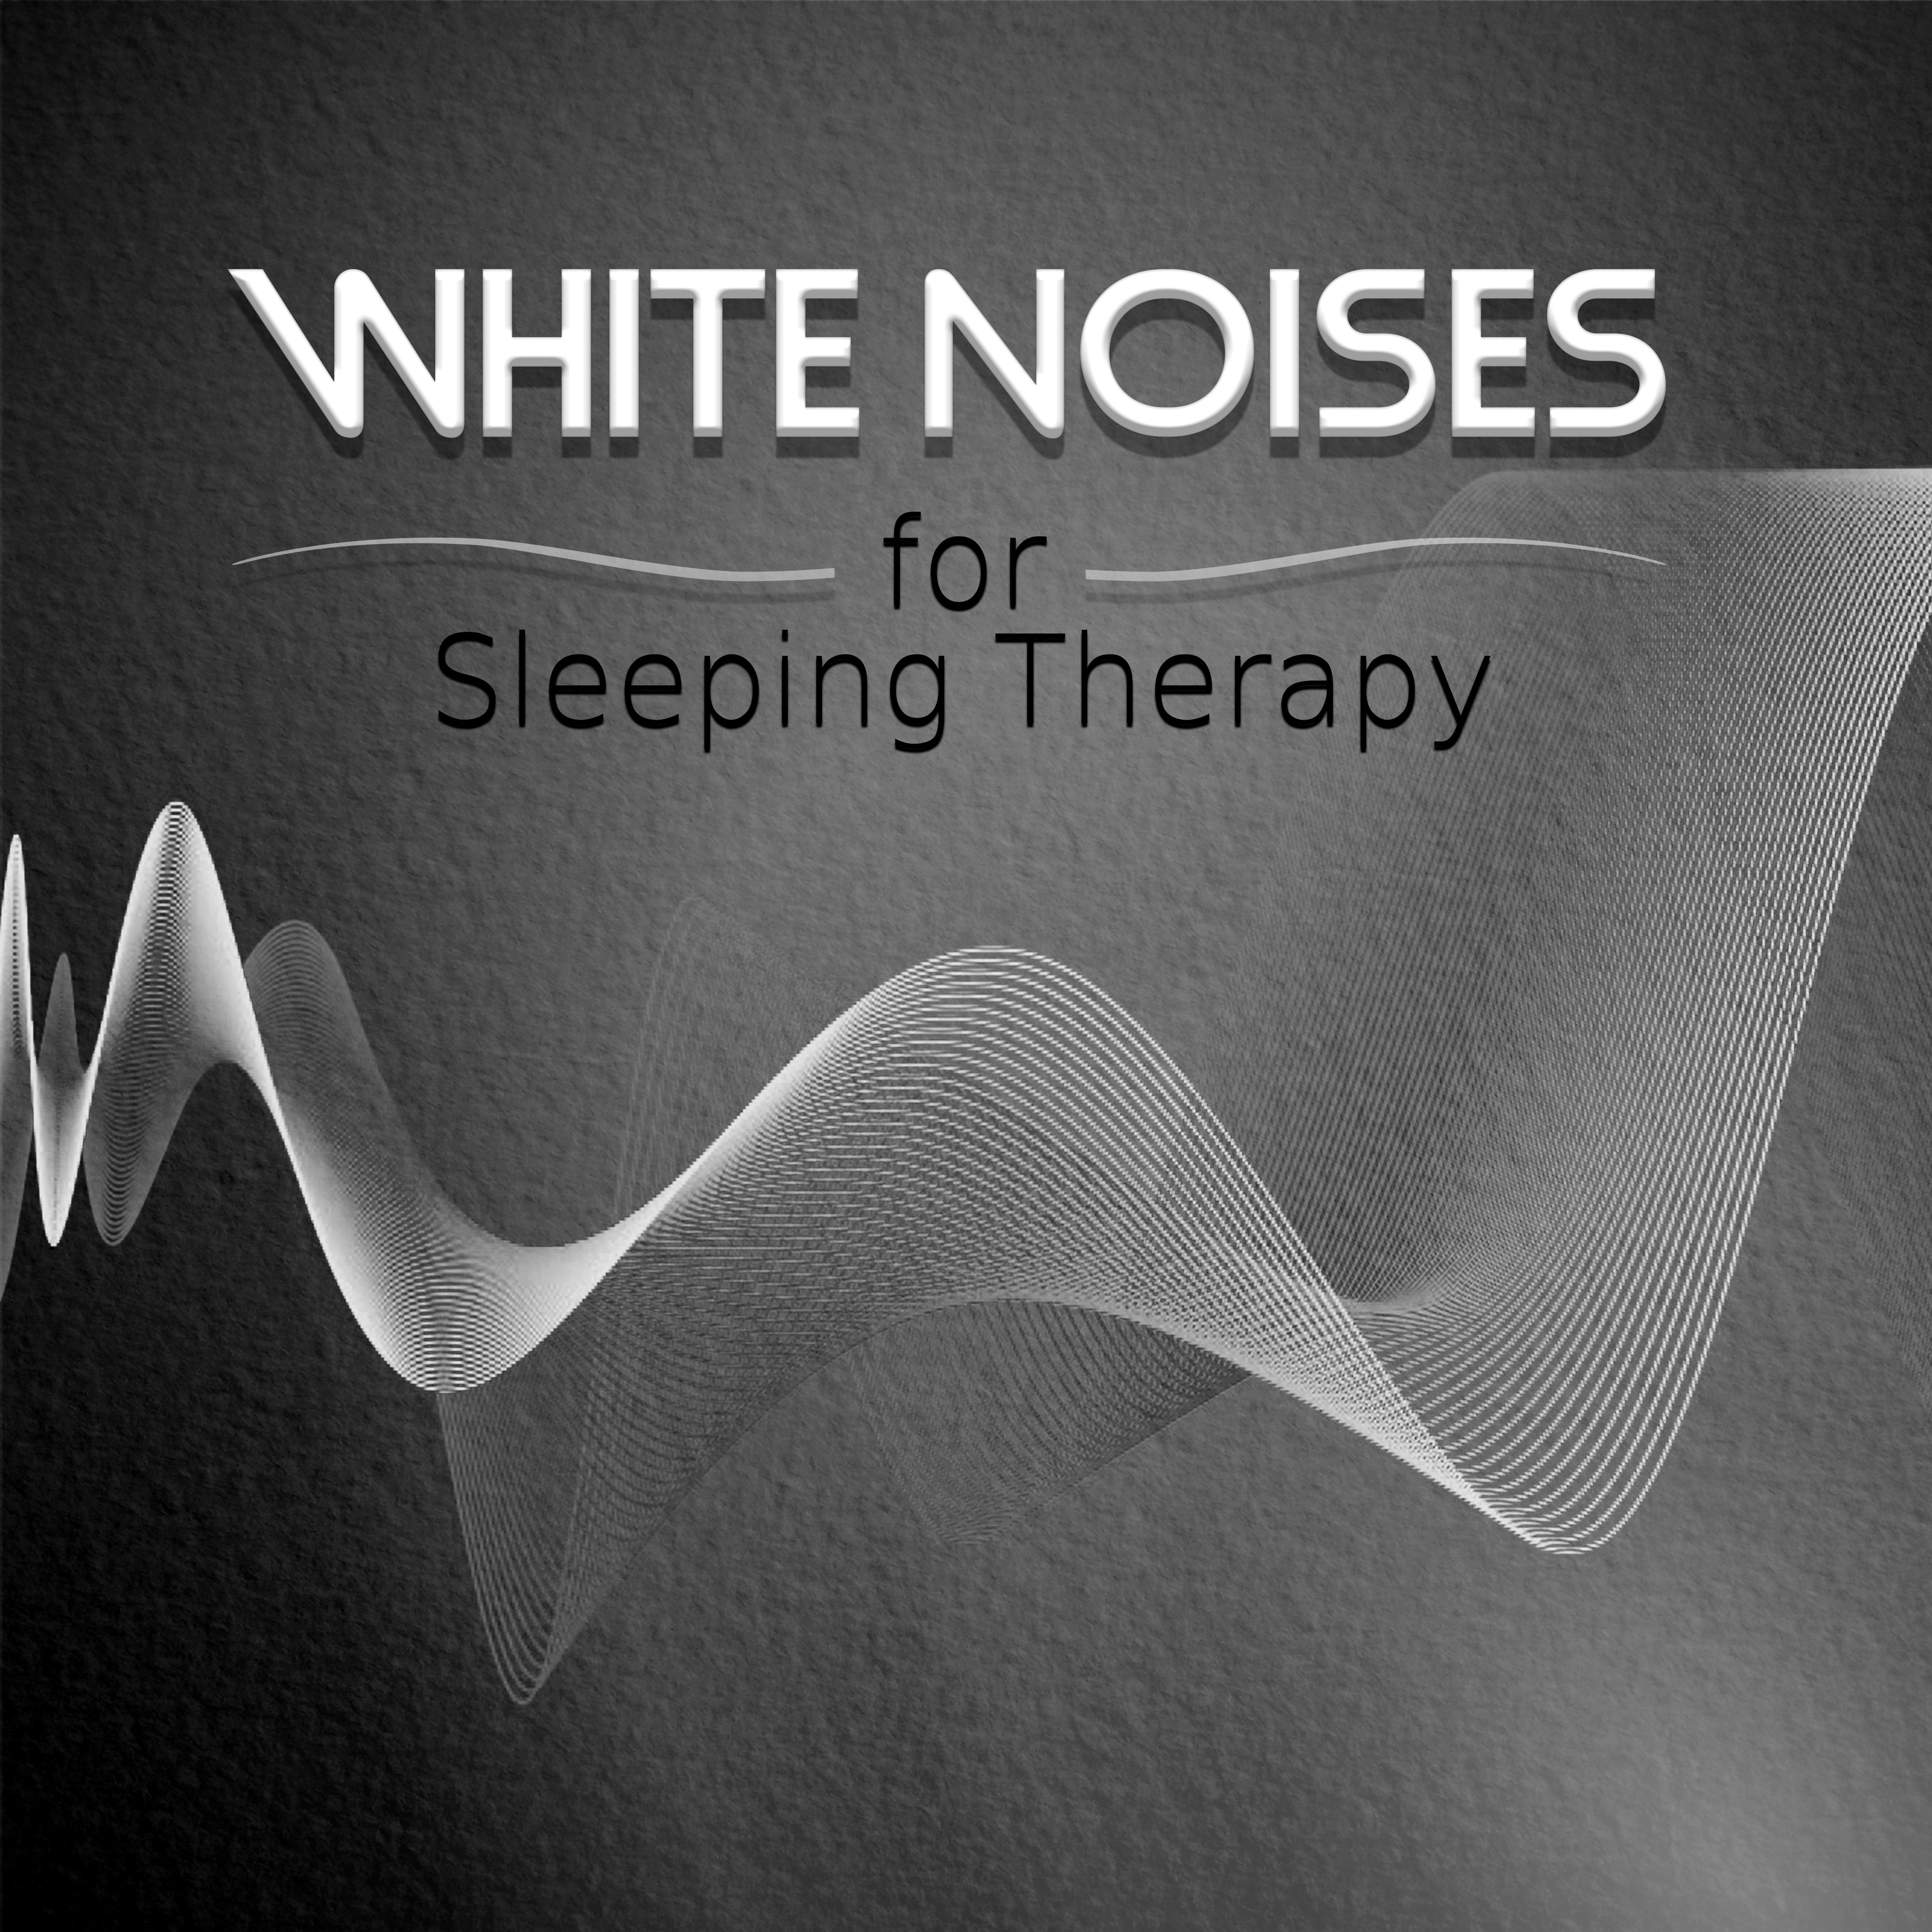 White Noises for Sleeping Therapy  Natural Sounds for Relaxation Meditation, Nature Sounds for Deep Sleep, Relaxing Music, Sleep Baby Sleep, Trouble Sleeping